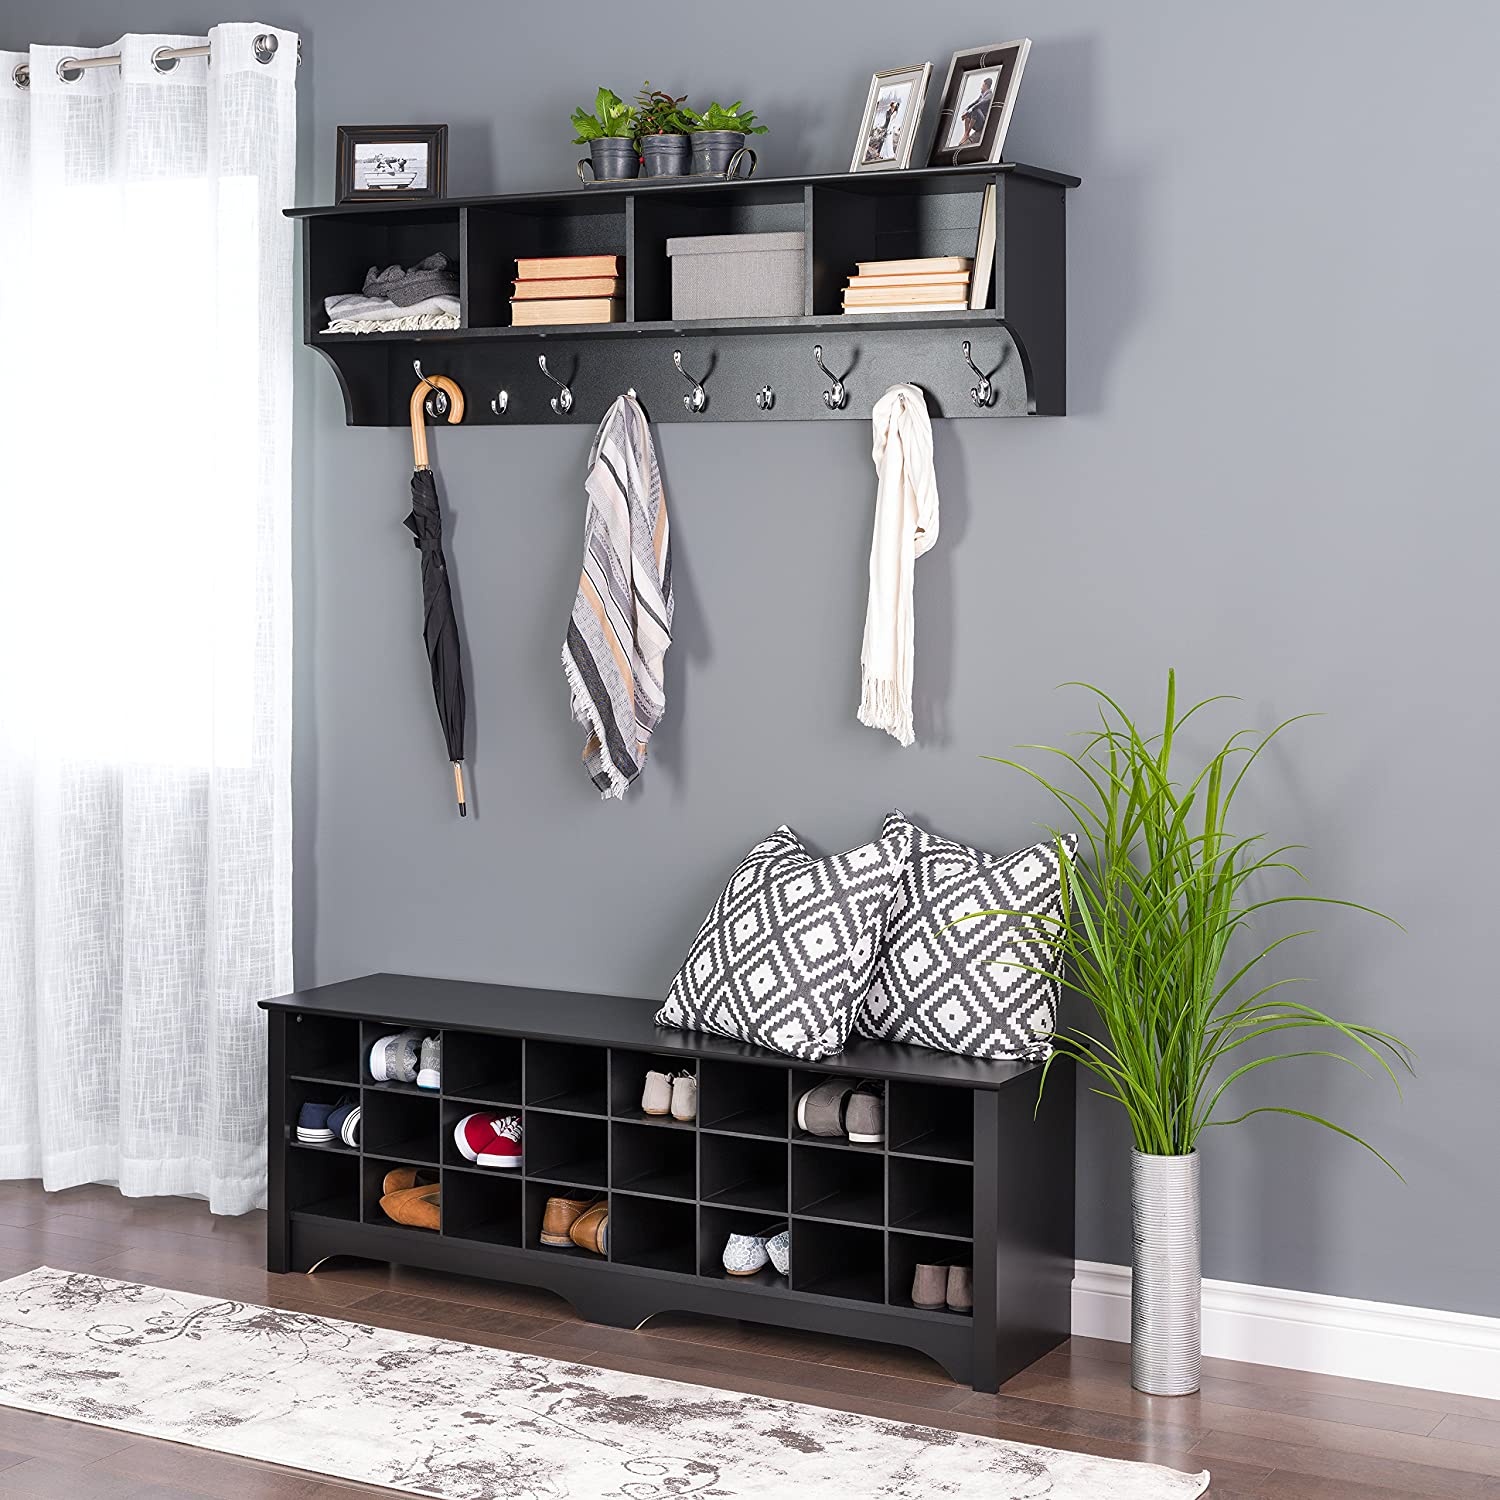 Benches : 24 Pair Shoe Storage Cubby Bench